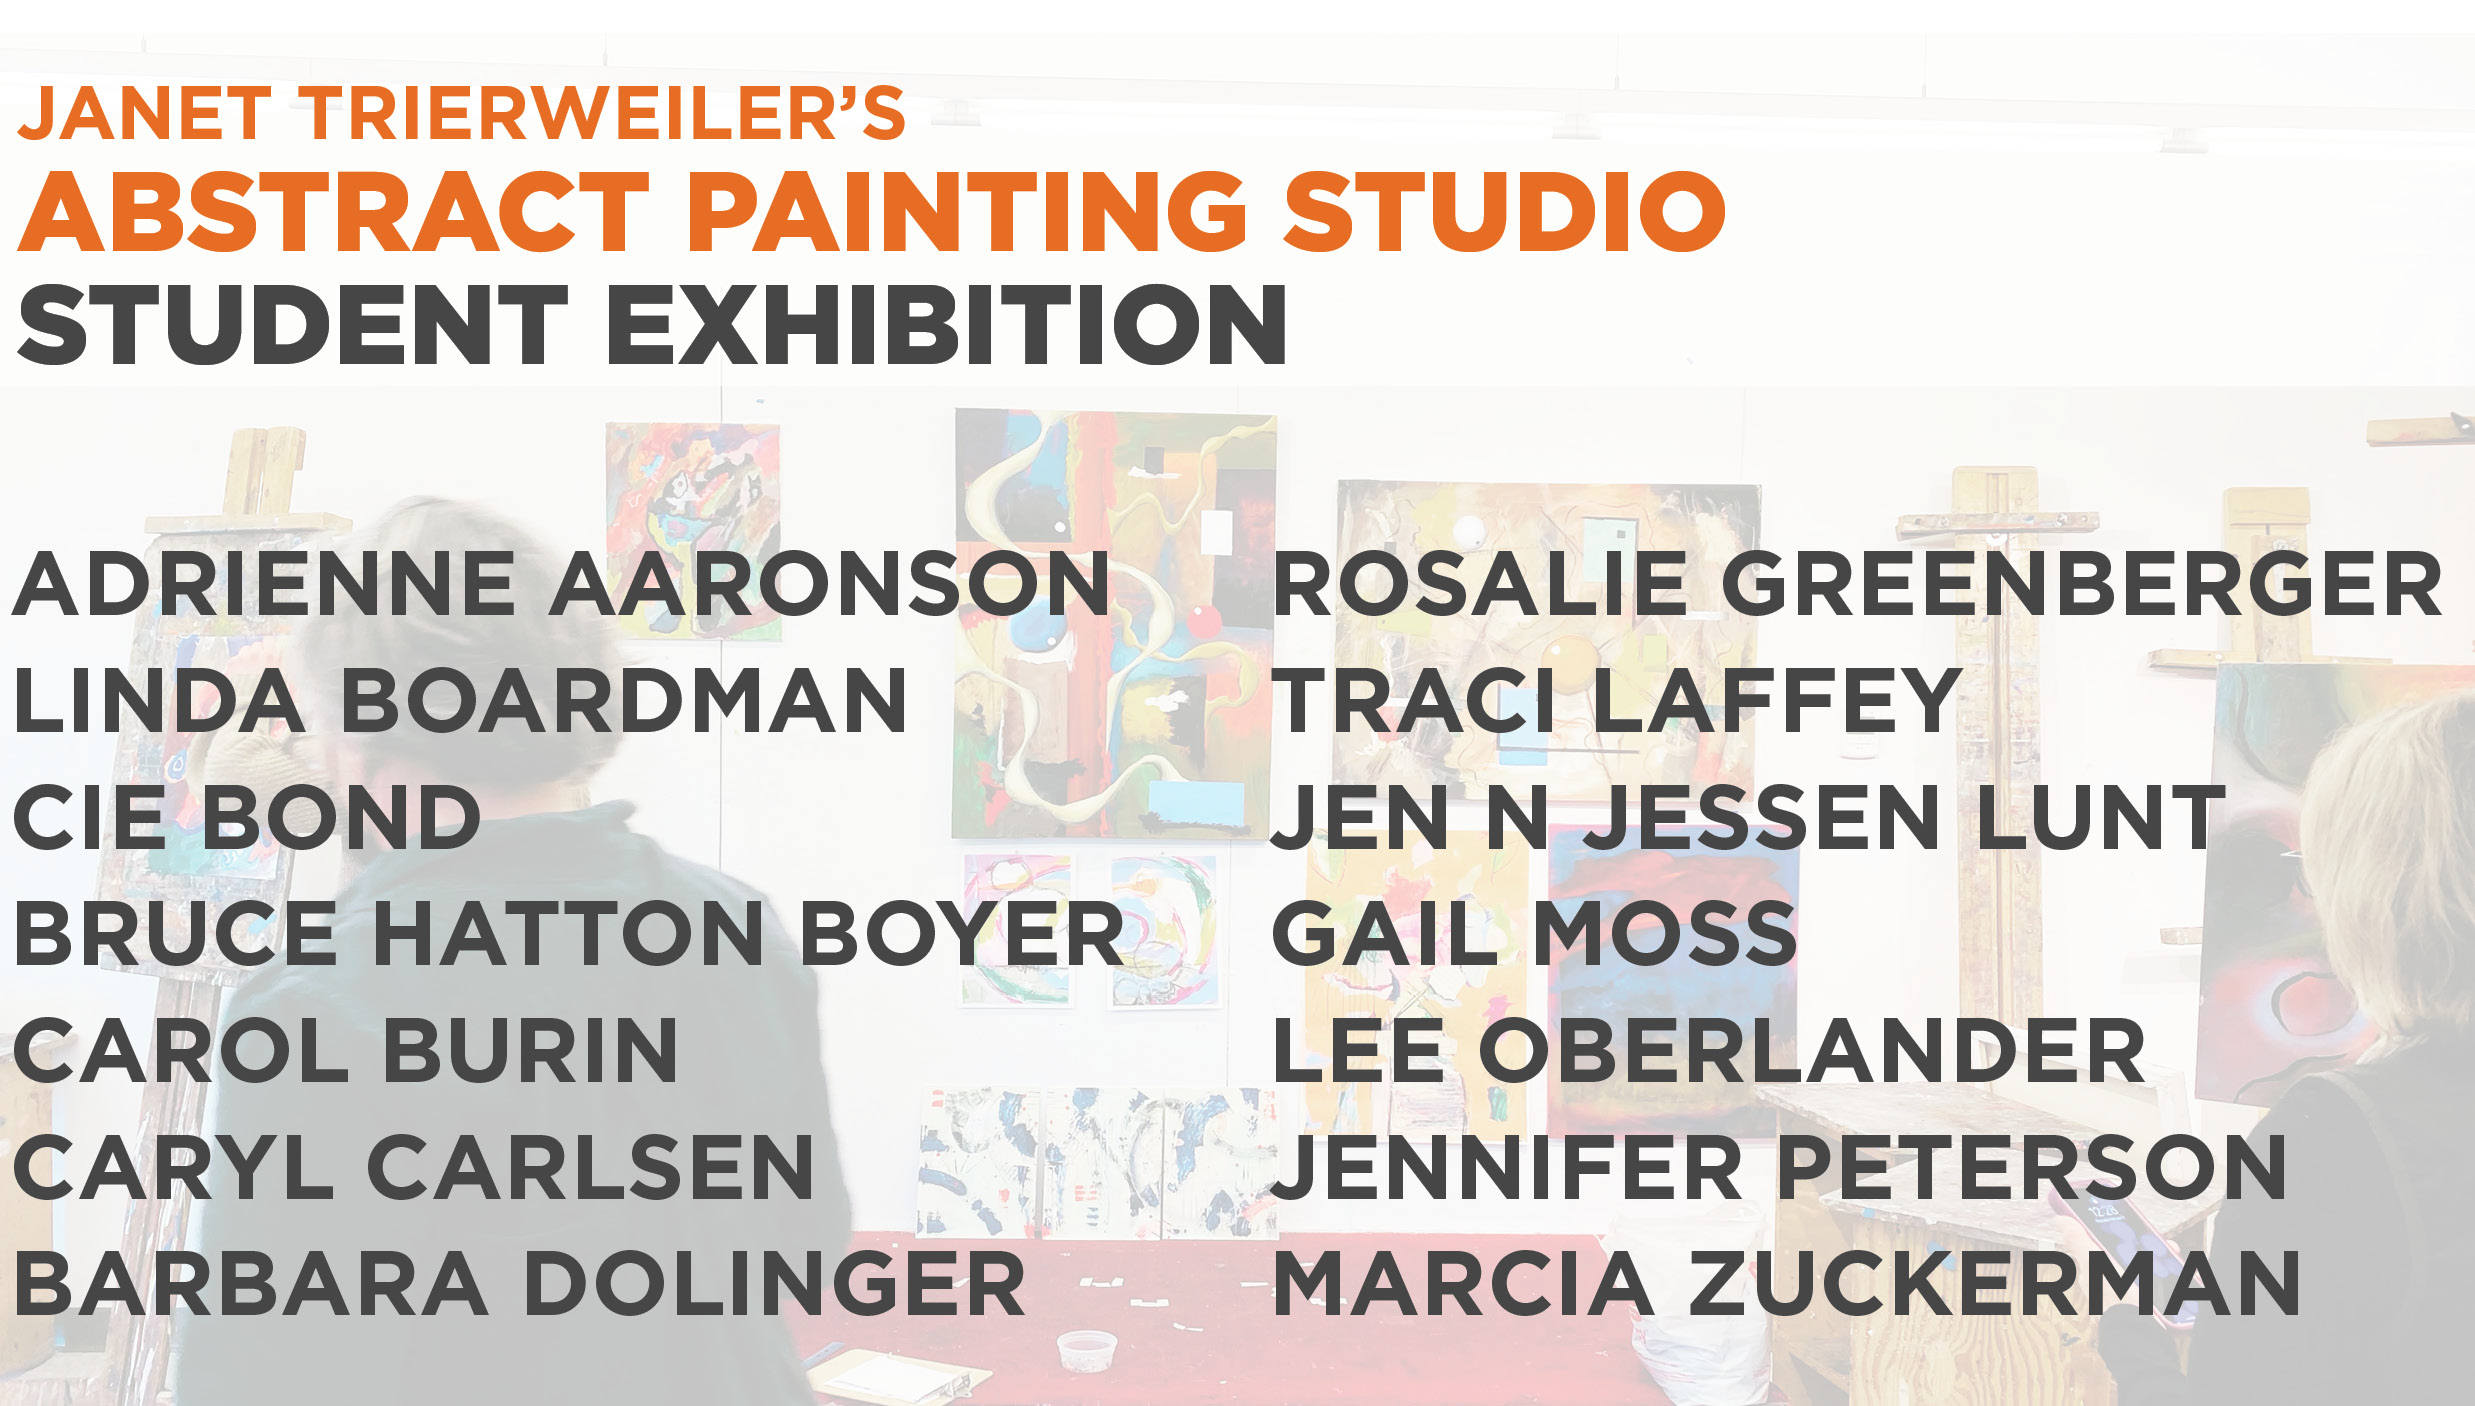 Header image for Janet Trierweiler's Abstract Painting Studio Student Exhibition